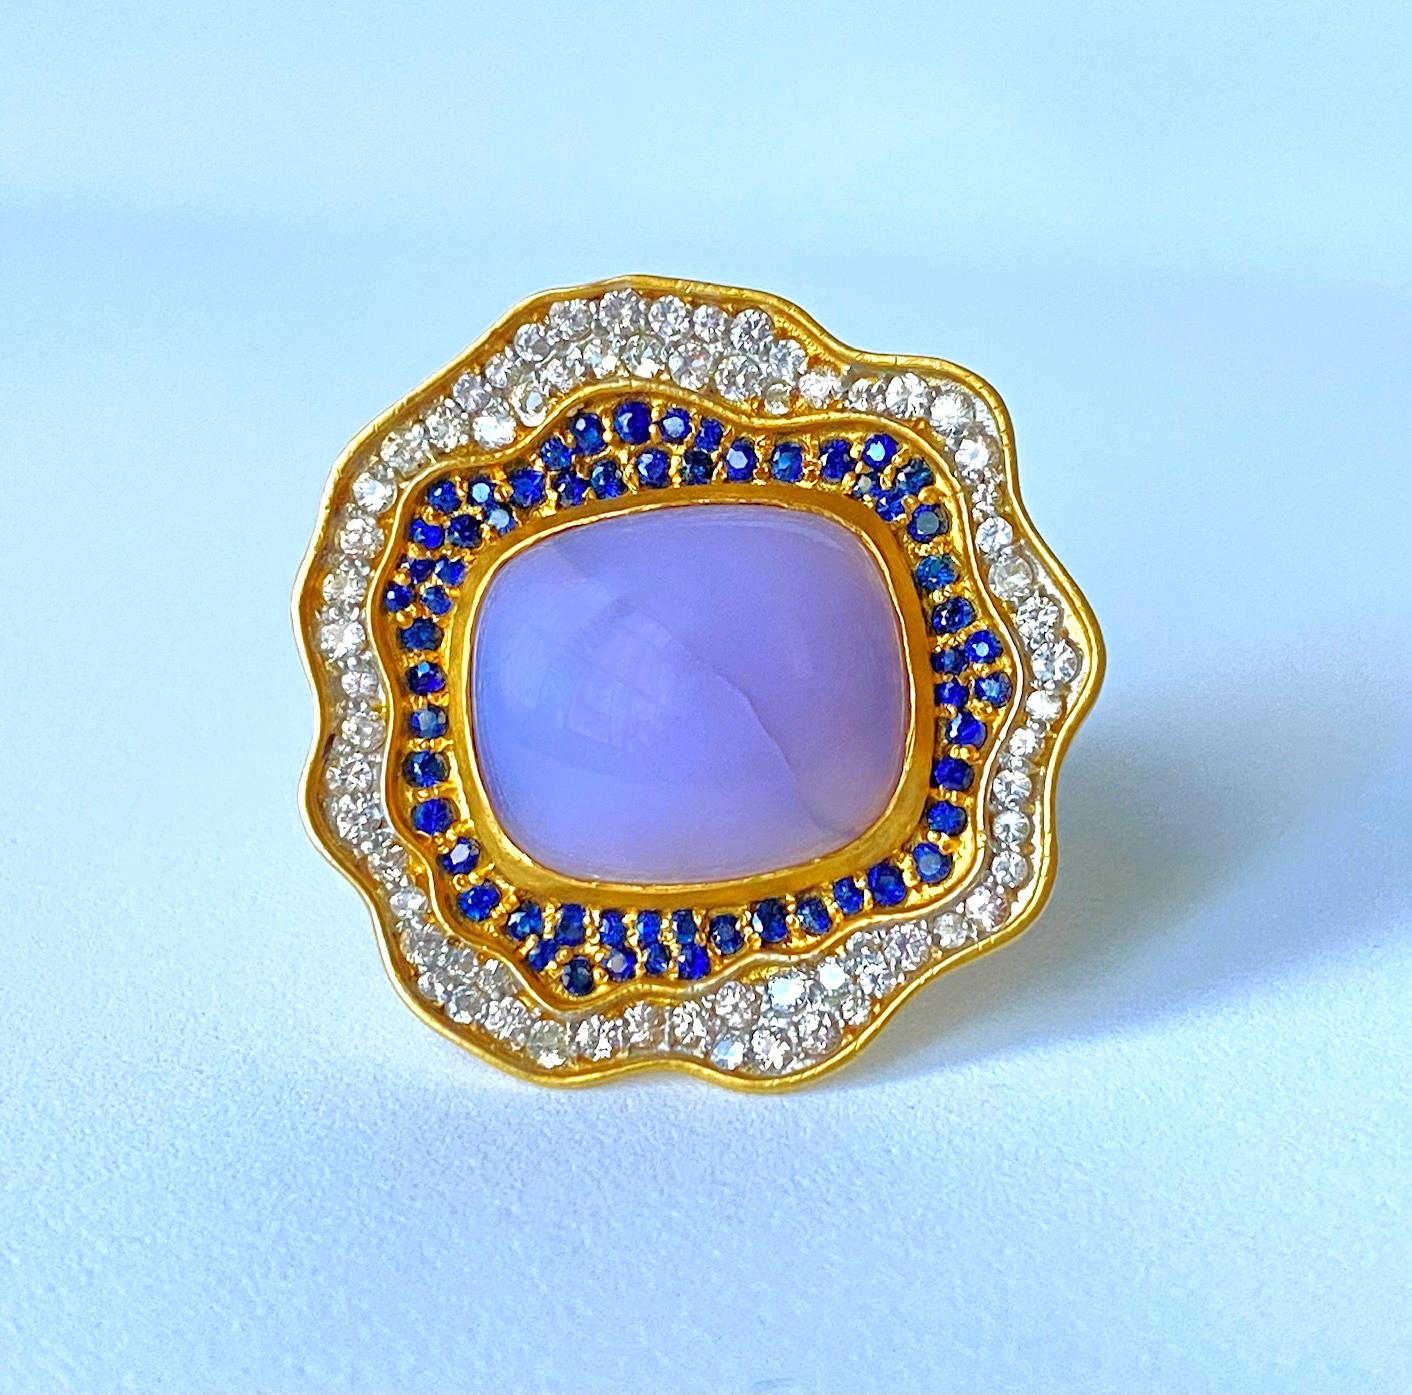 Chalcedony Sapphires and 18 Karat Gold Cocktail Ring by Lauren Harper For Sale 3